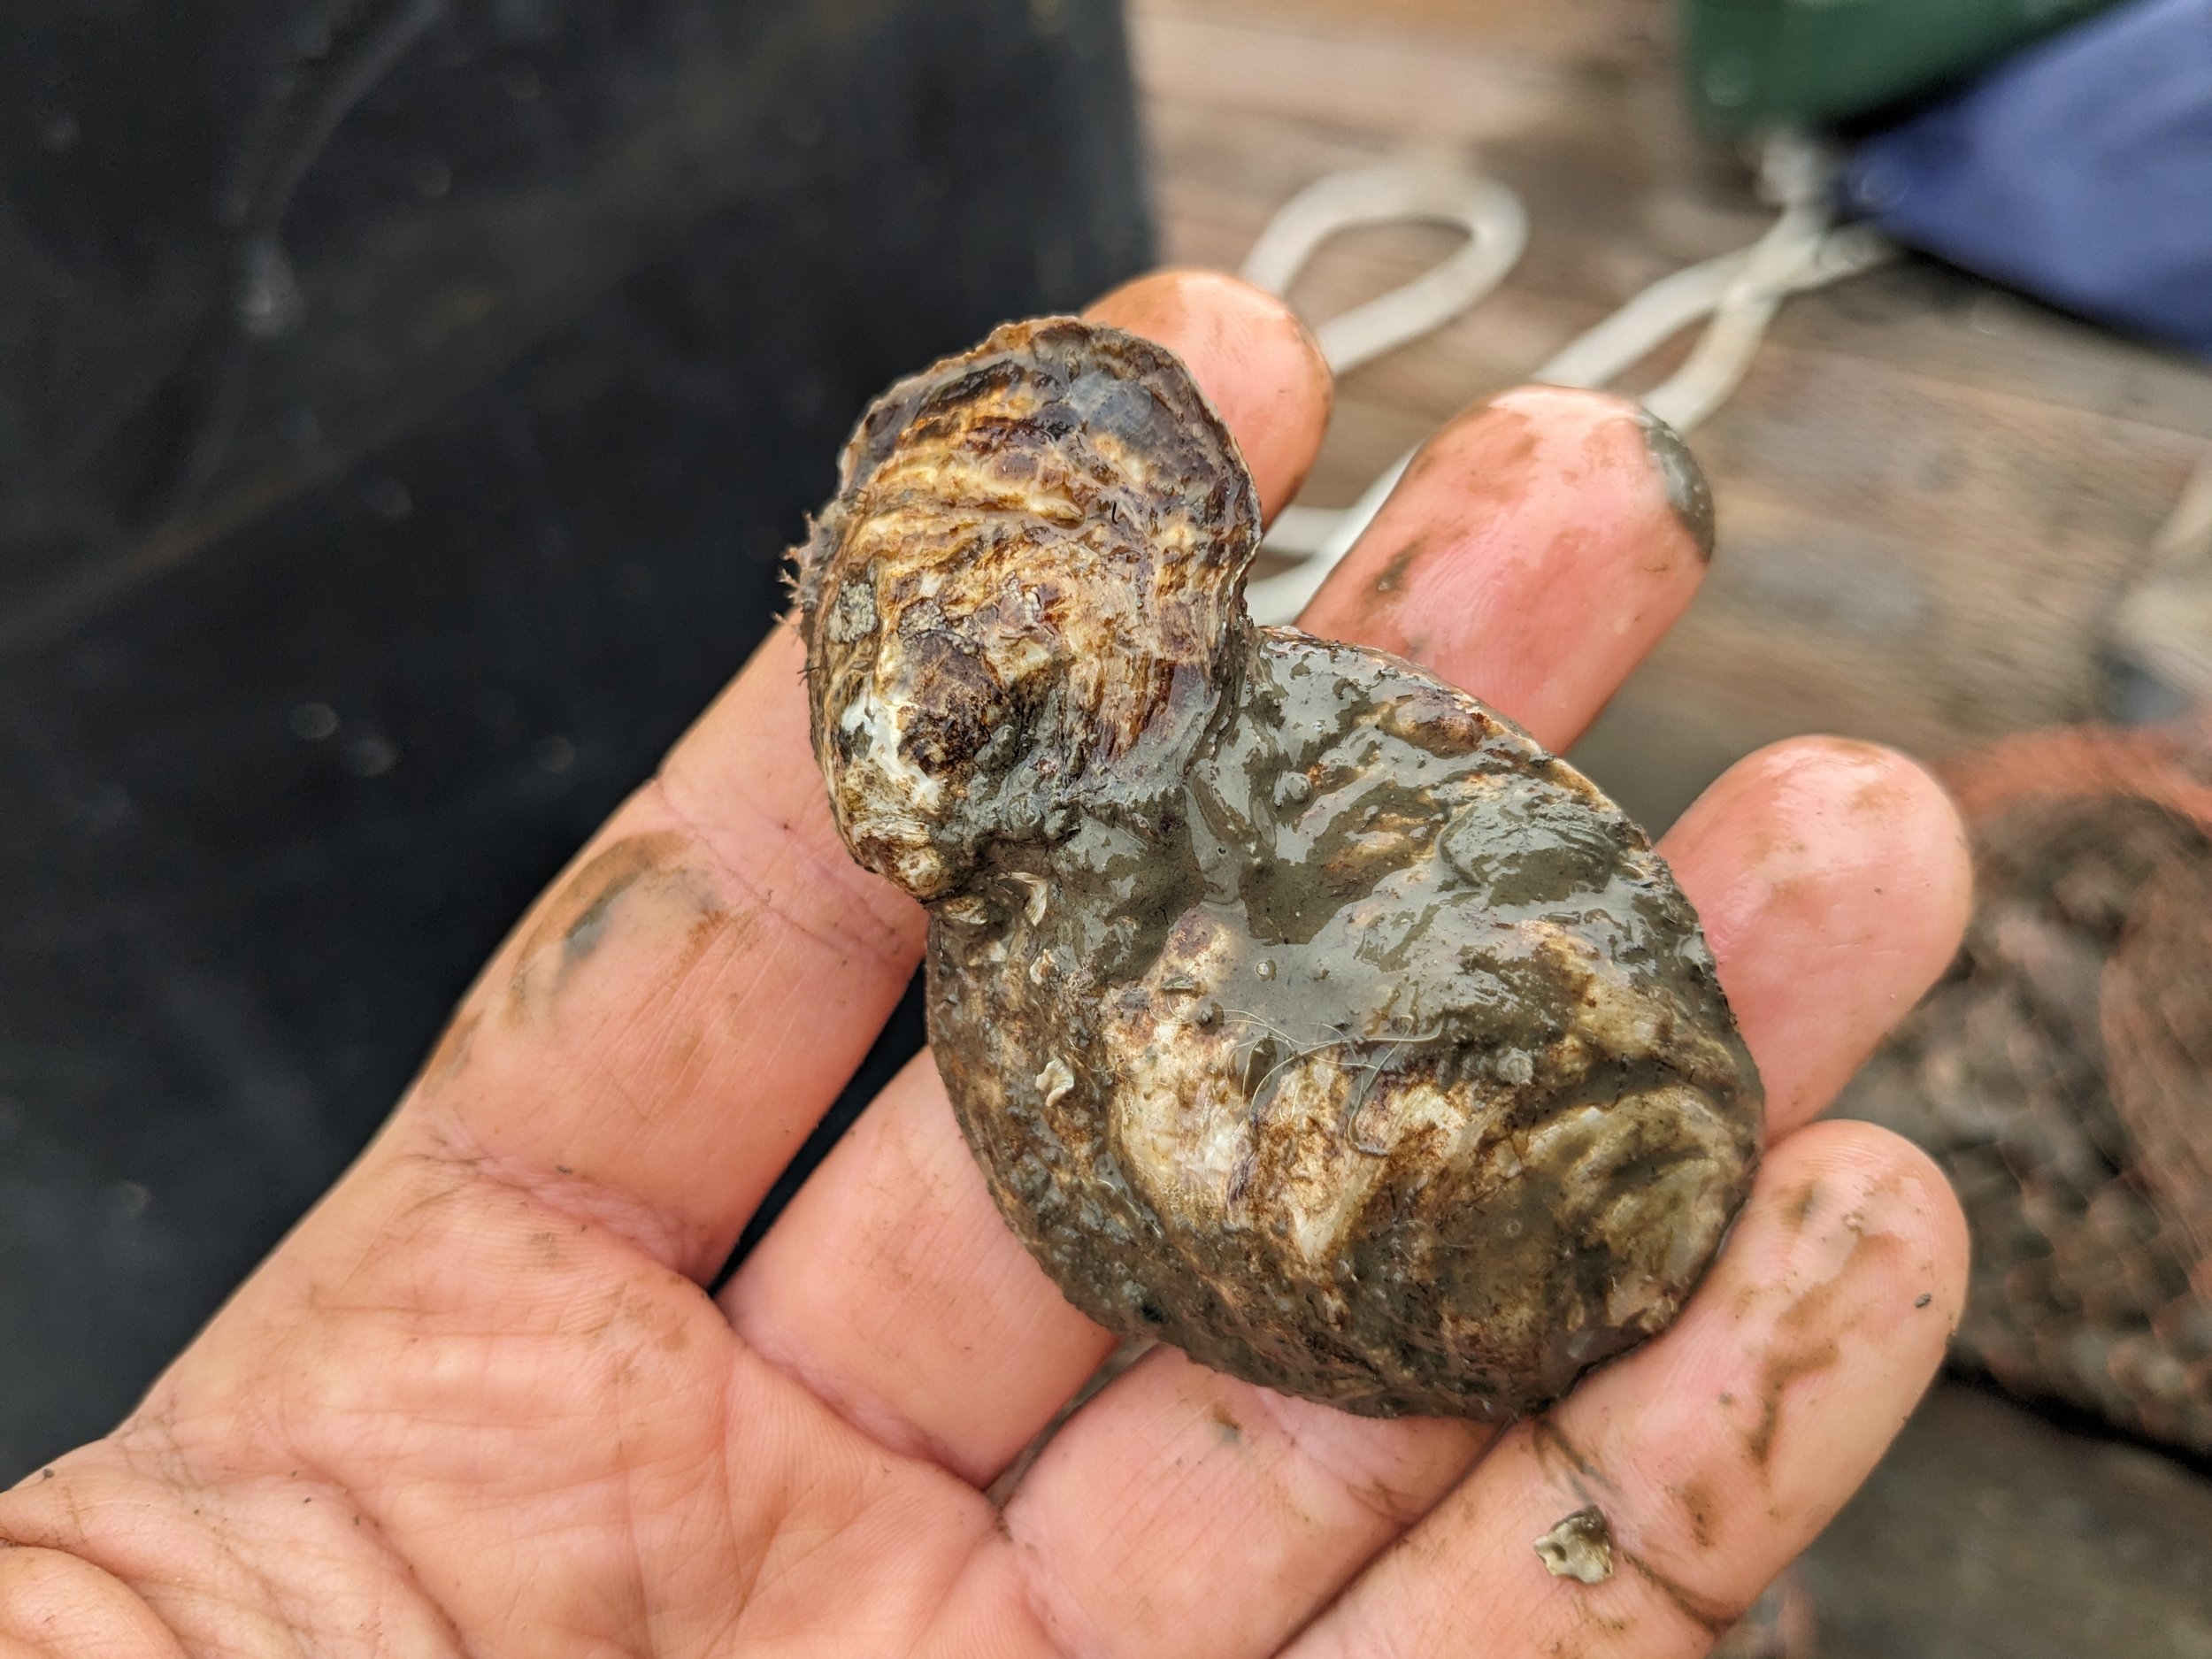 As you can see, oysters like to grow on top of eachother